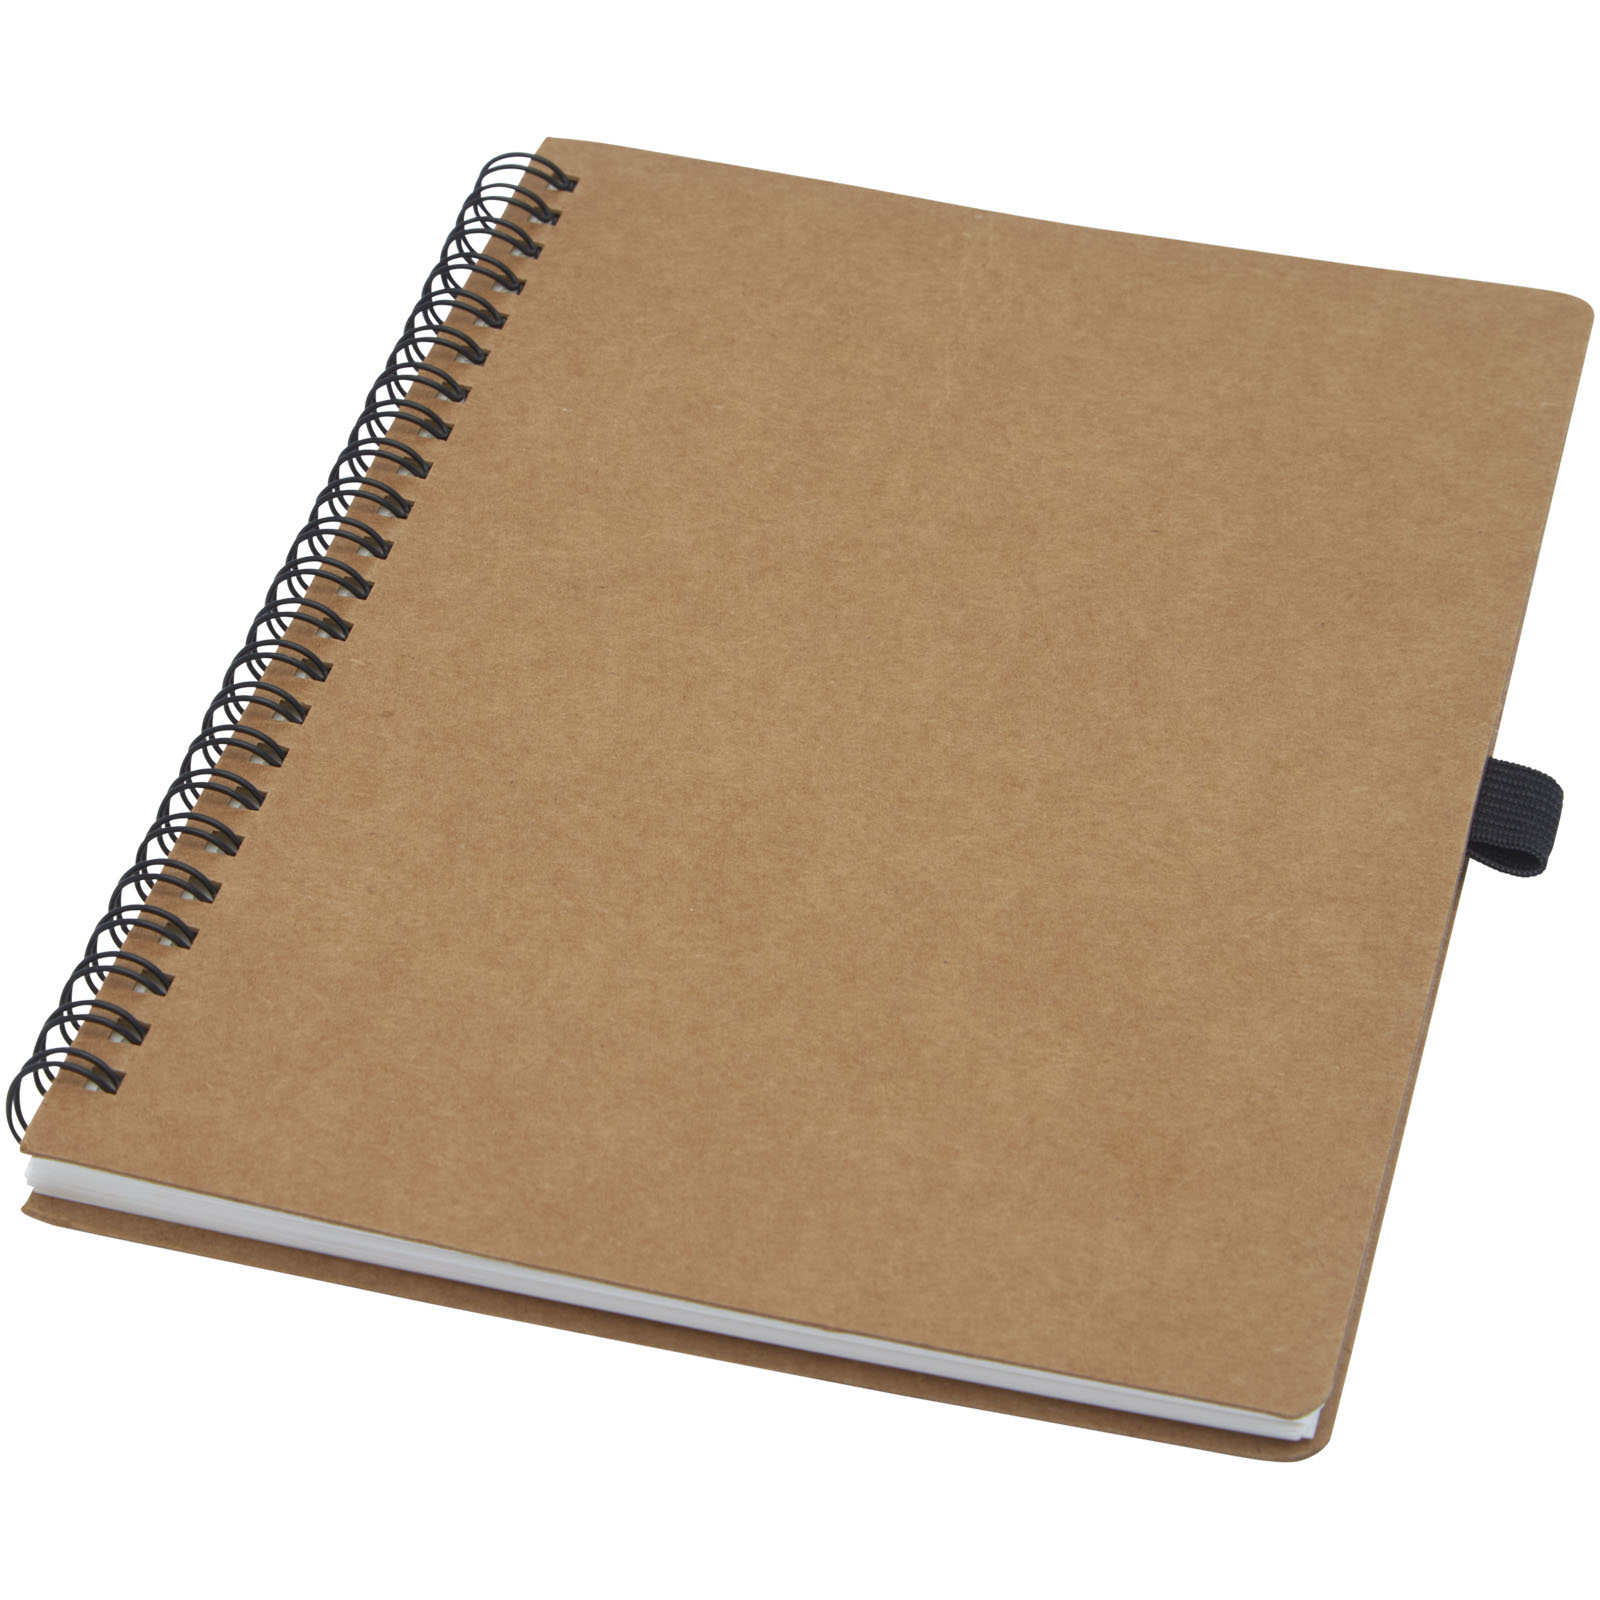 Advertising Notebooks - Cobble A5 wire-o recycled cardboard notebook with stone paper - 0